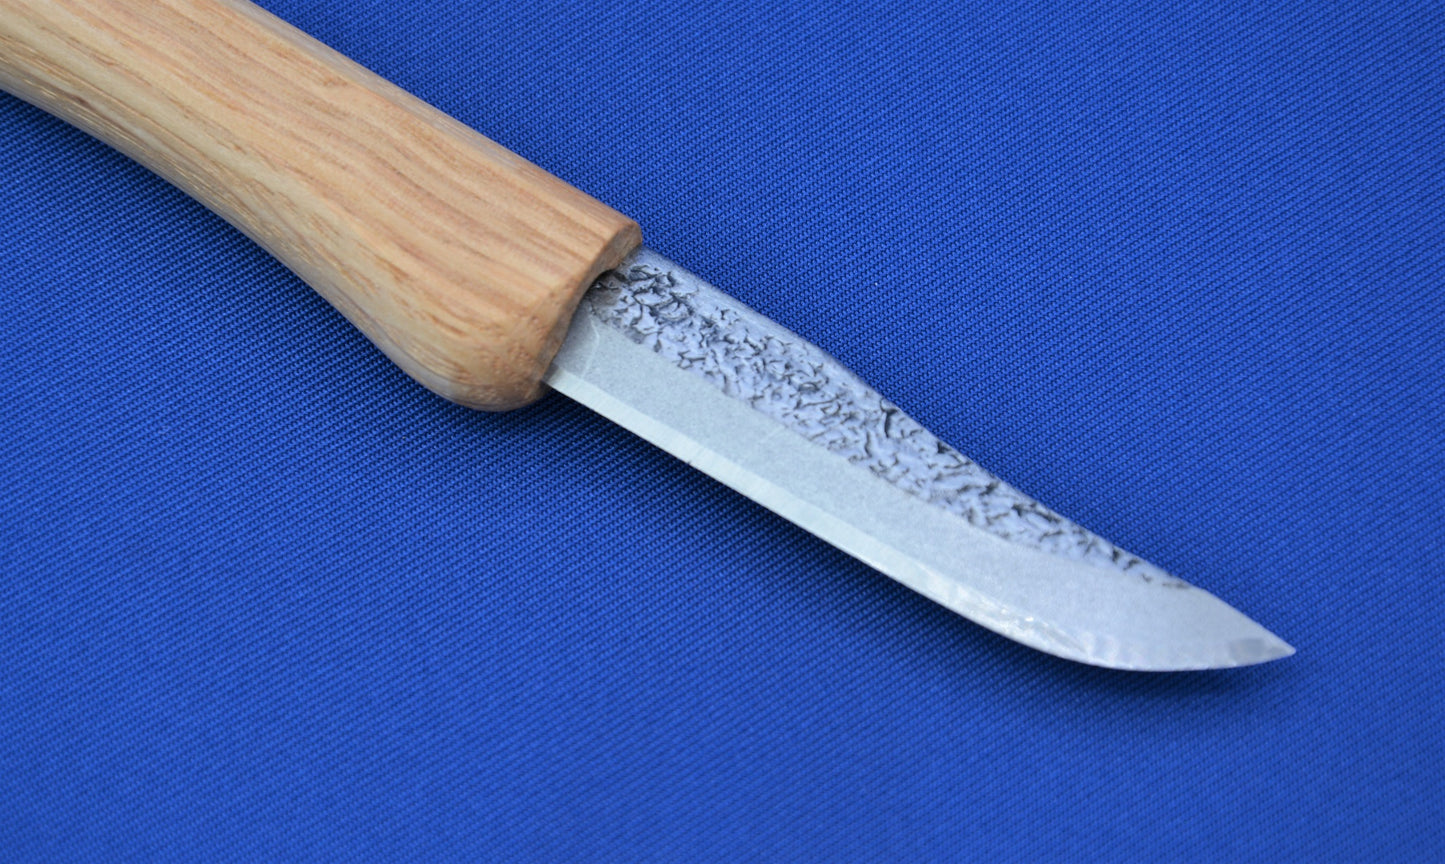 Wood Carving Knife - Clip Point Right